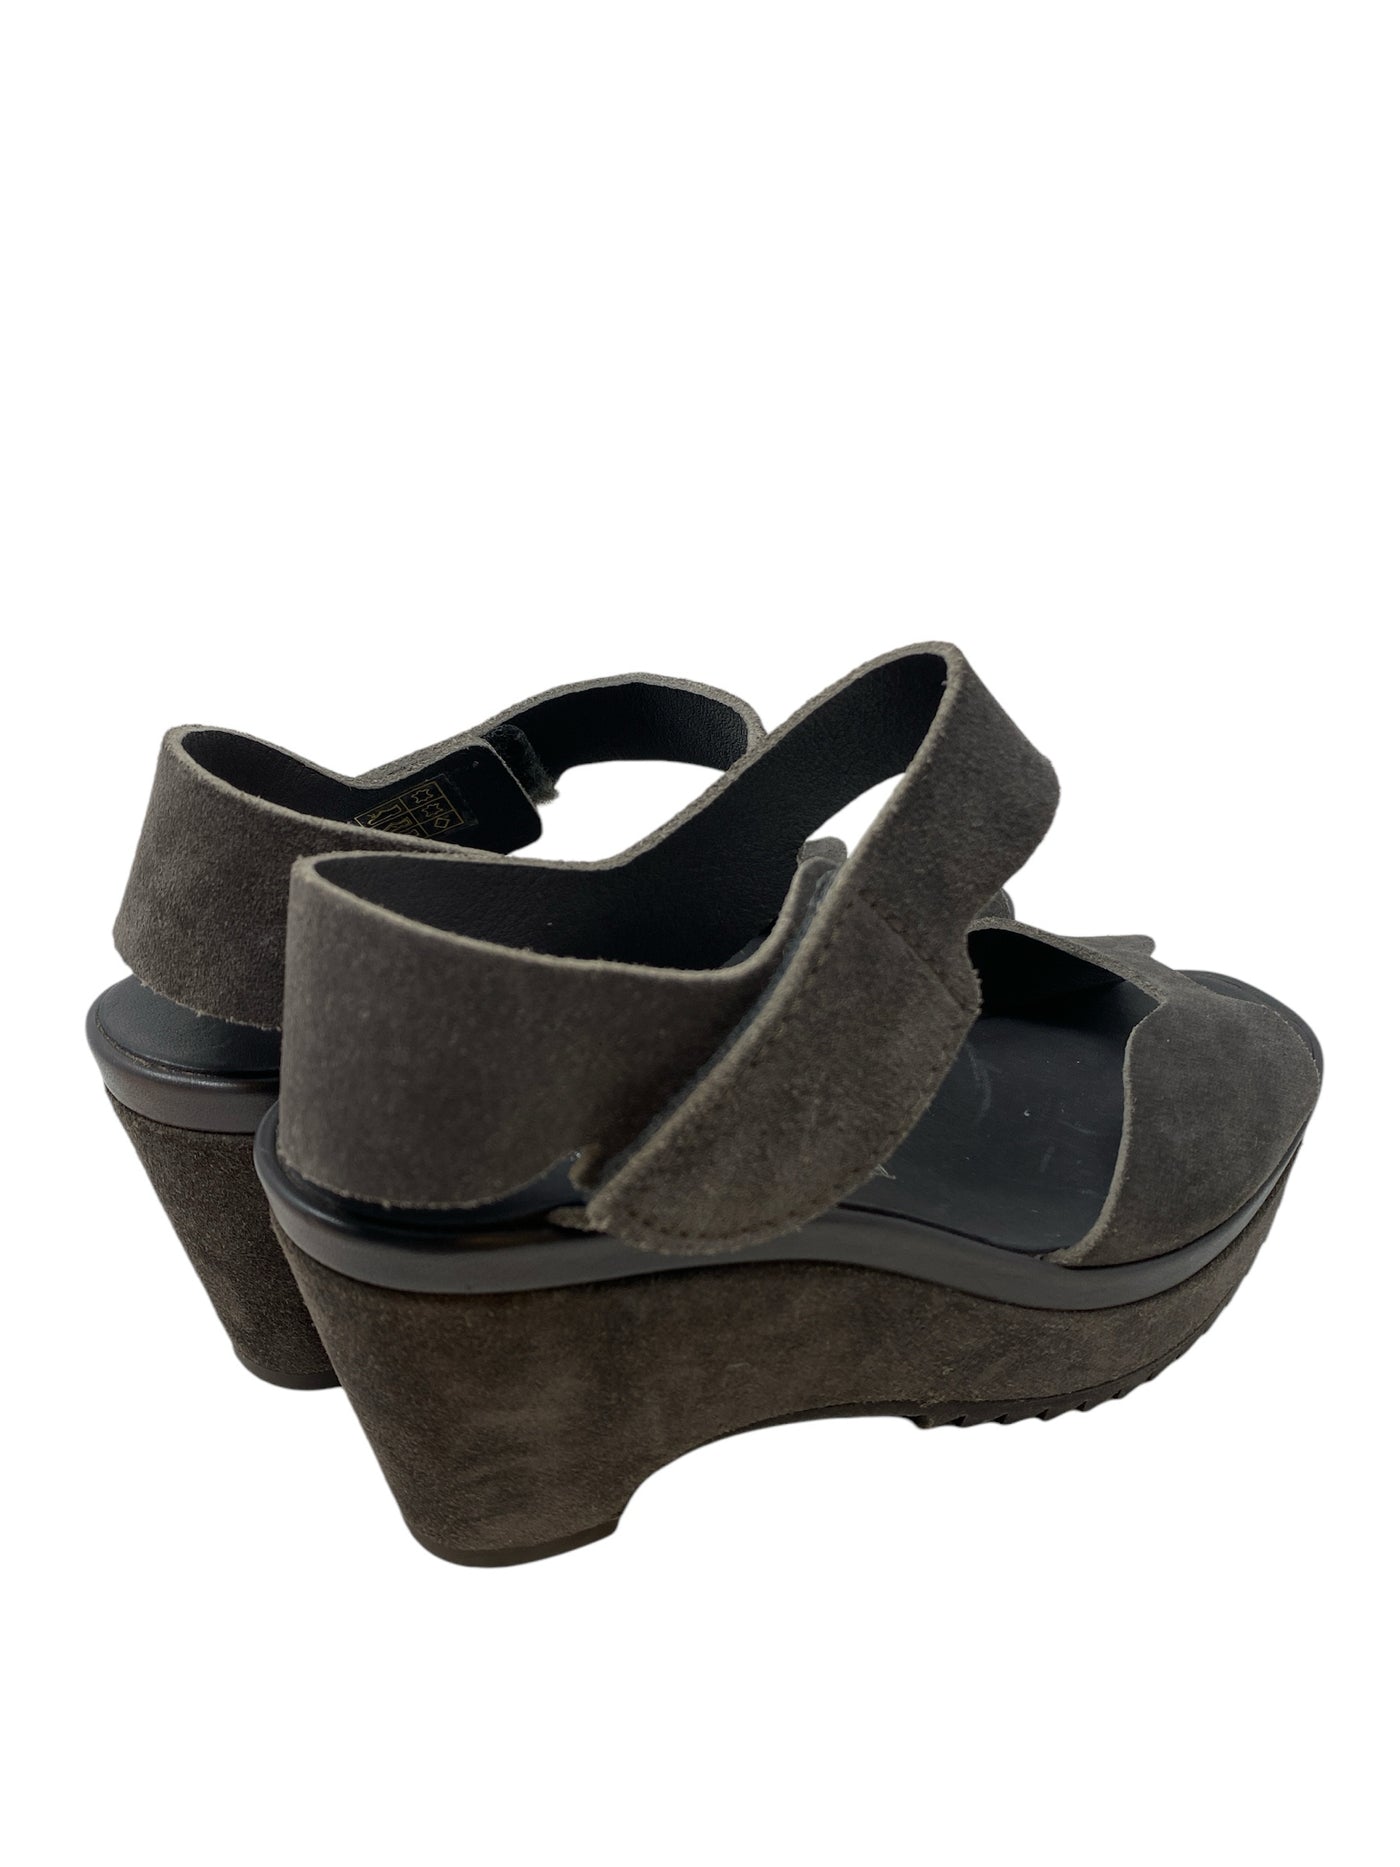 It's SO You Boutique Women Size 36 Grey Wedge